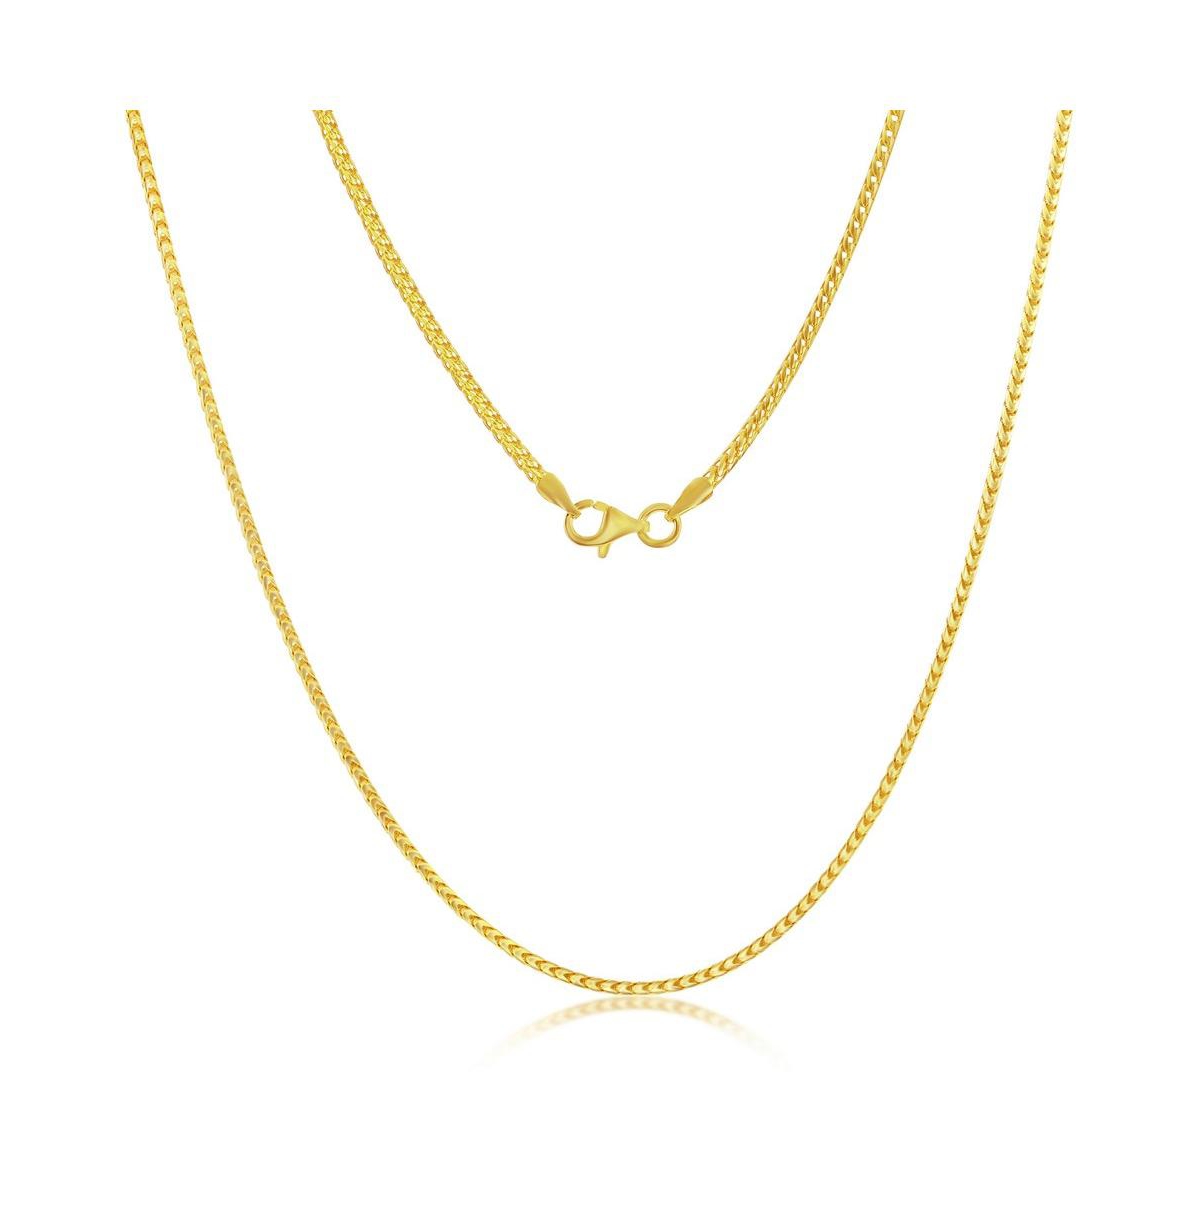 Franco Chain 1.5mm Sterling Silver or Gold Plated Over Sterling Silver 16" Necklace - Silver